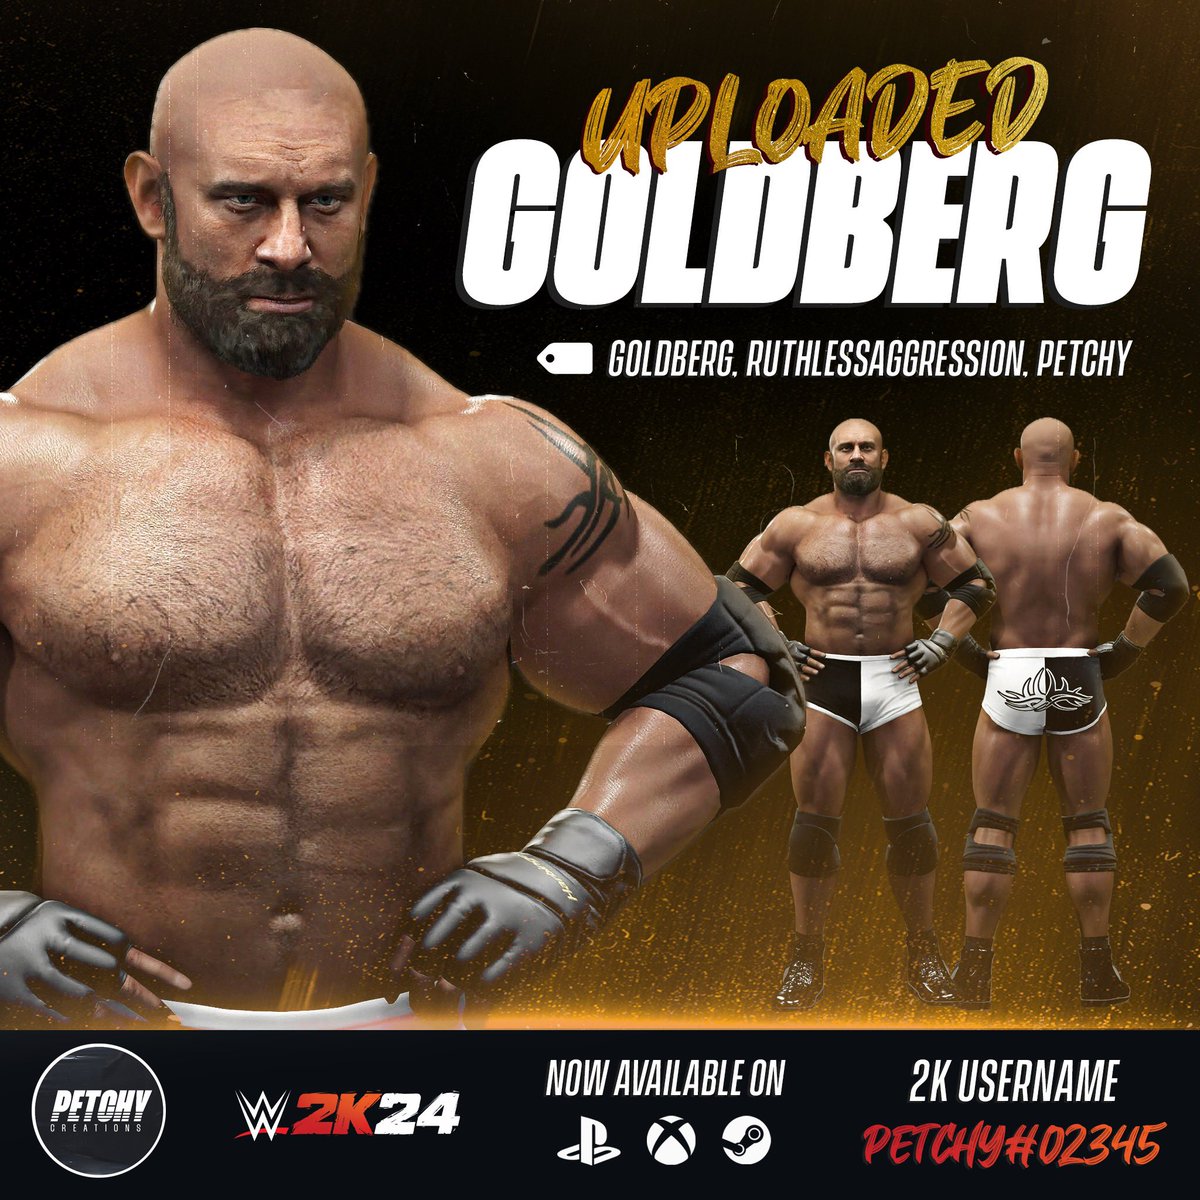 ONE LAST DEVASTATING SPEAR! ☠️

Goldberg ‘04 is now available to download on #WWE2K24!

Collaboration with @Applesa18888542 & @TheJumpMan98 🤝

🏷 Goldberg, RuthlessAggression, Petchy

Thanks to @BigRighteous for the moveset on this one too 💪